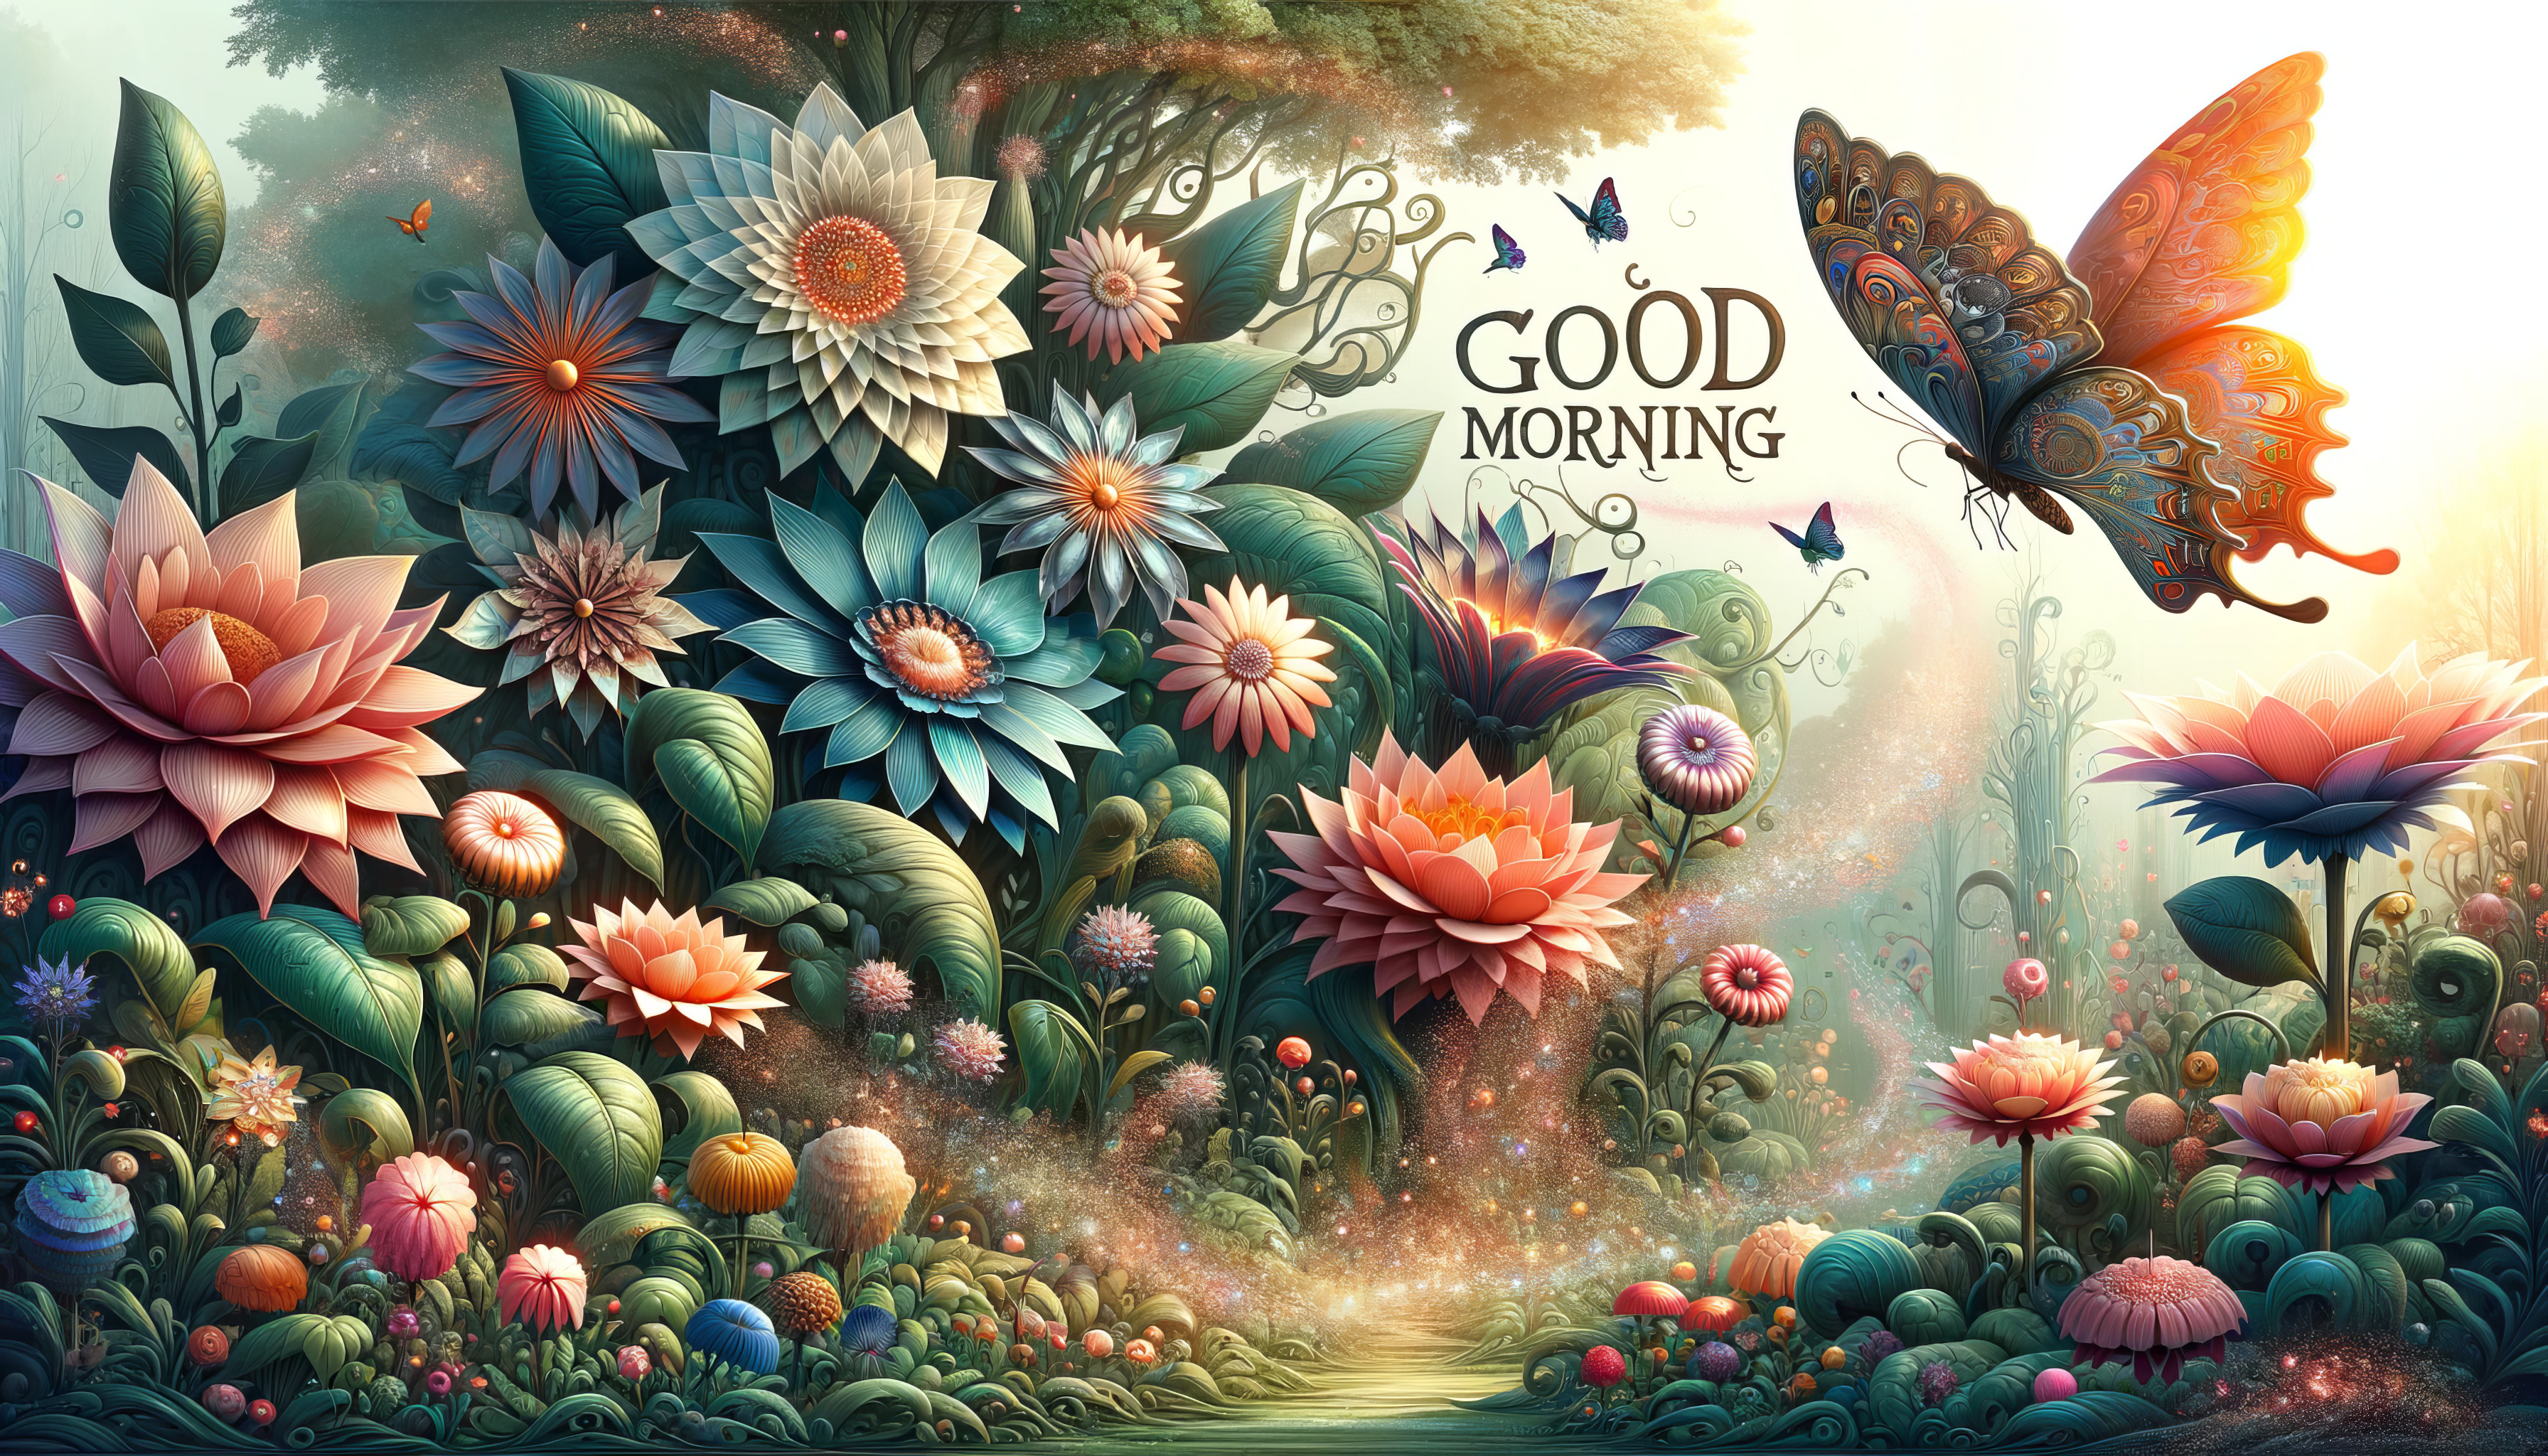 Enchanting floral HD desktop wallpaper with vibrant flowers and a butterfly featuring 'Good Morning' text for a refreshing background.